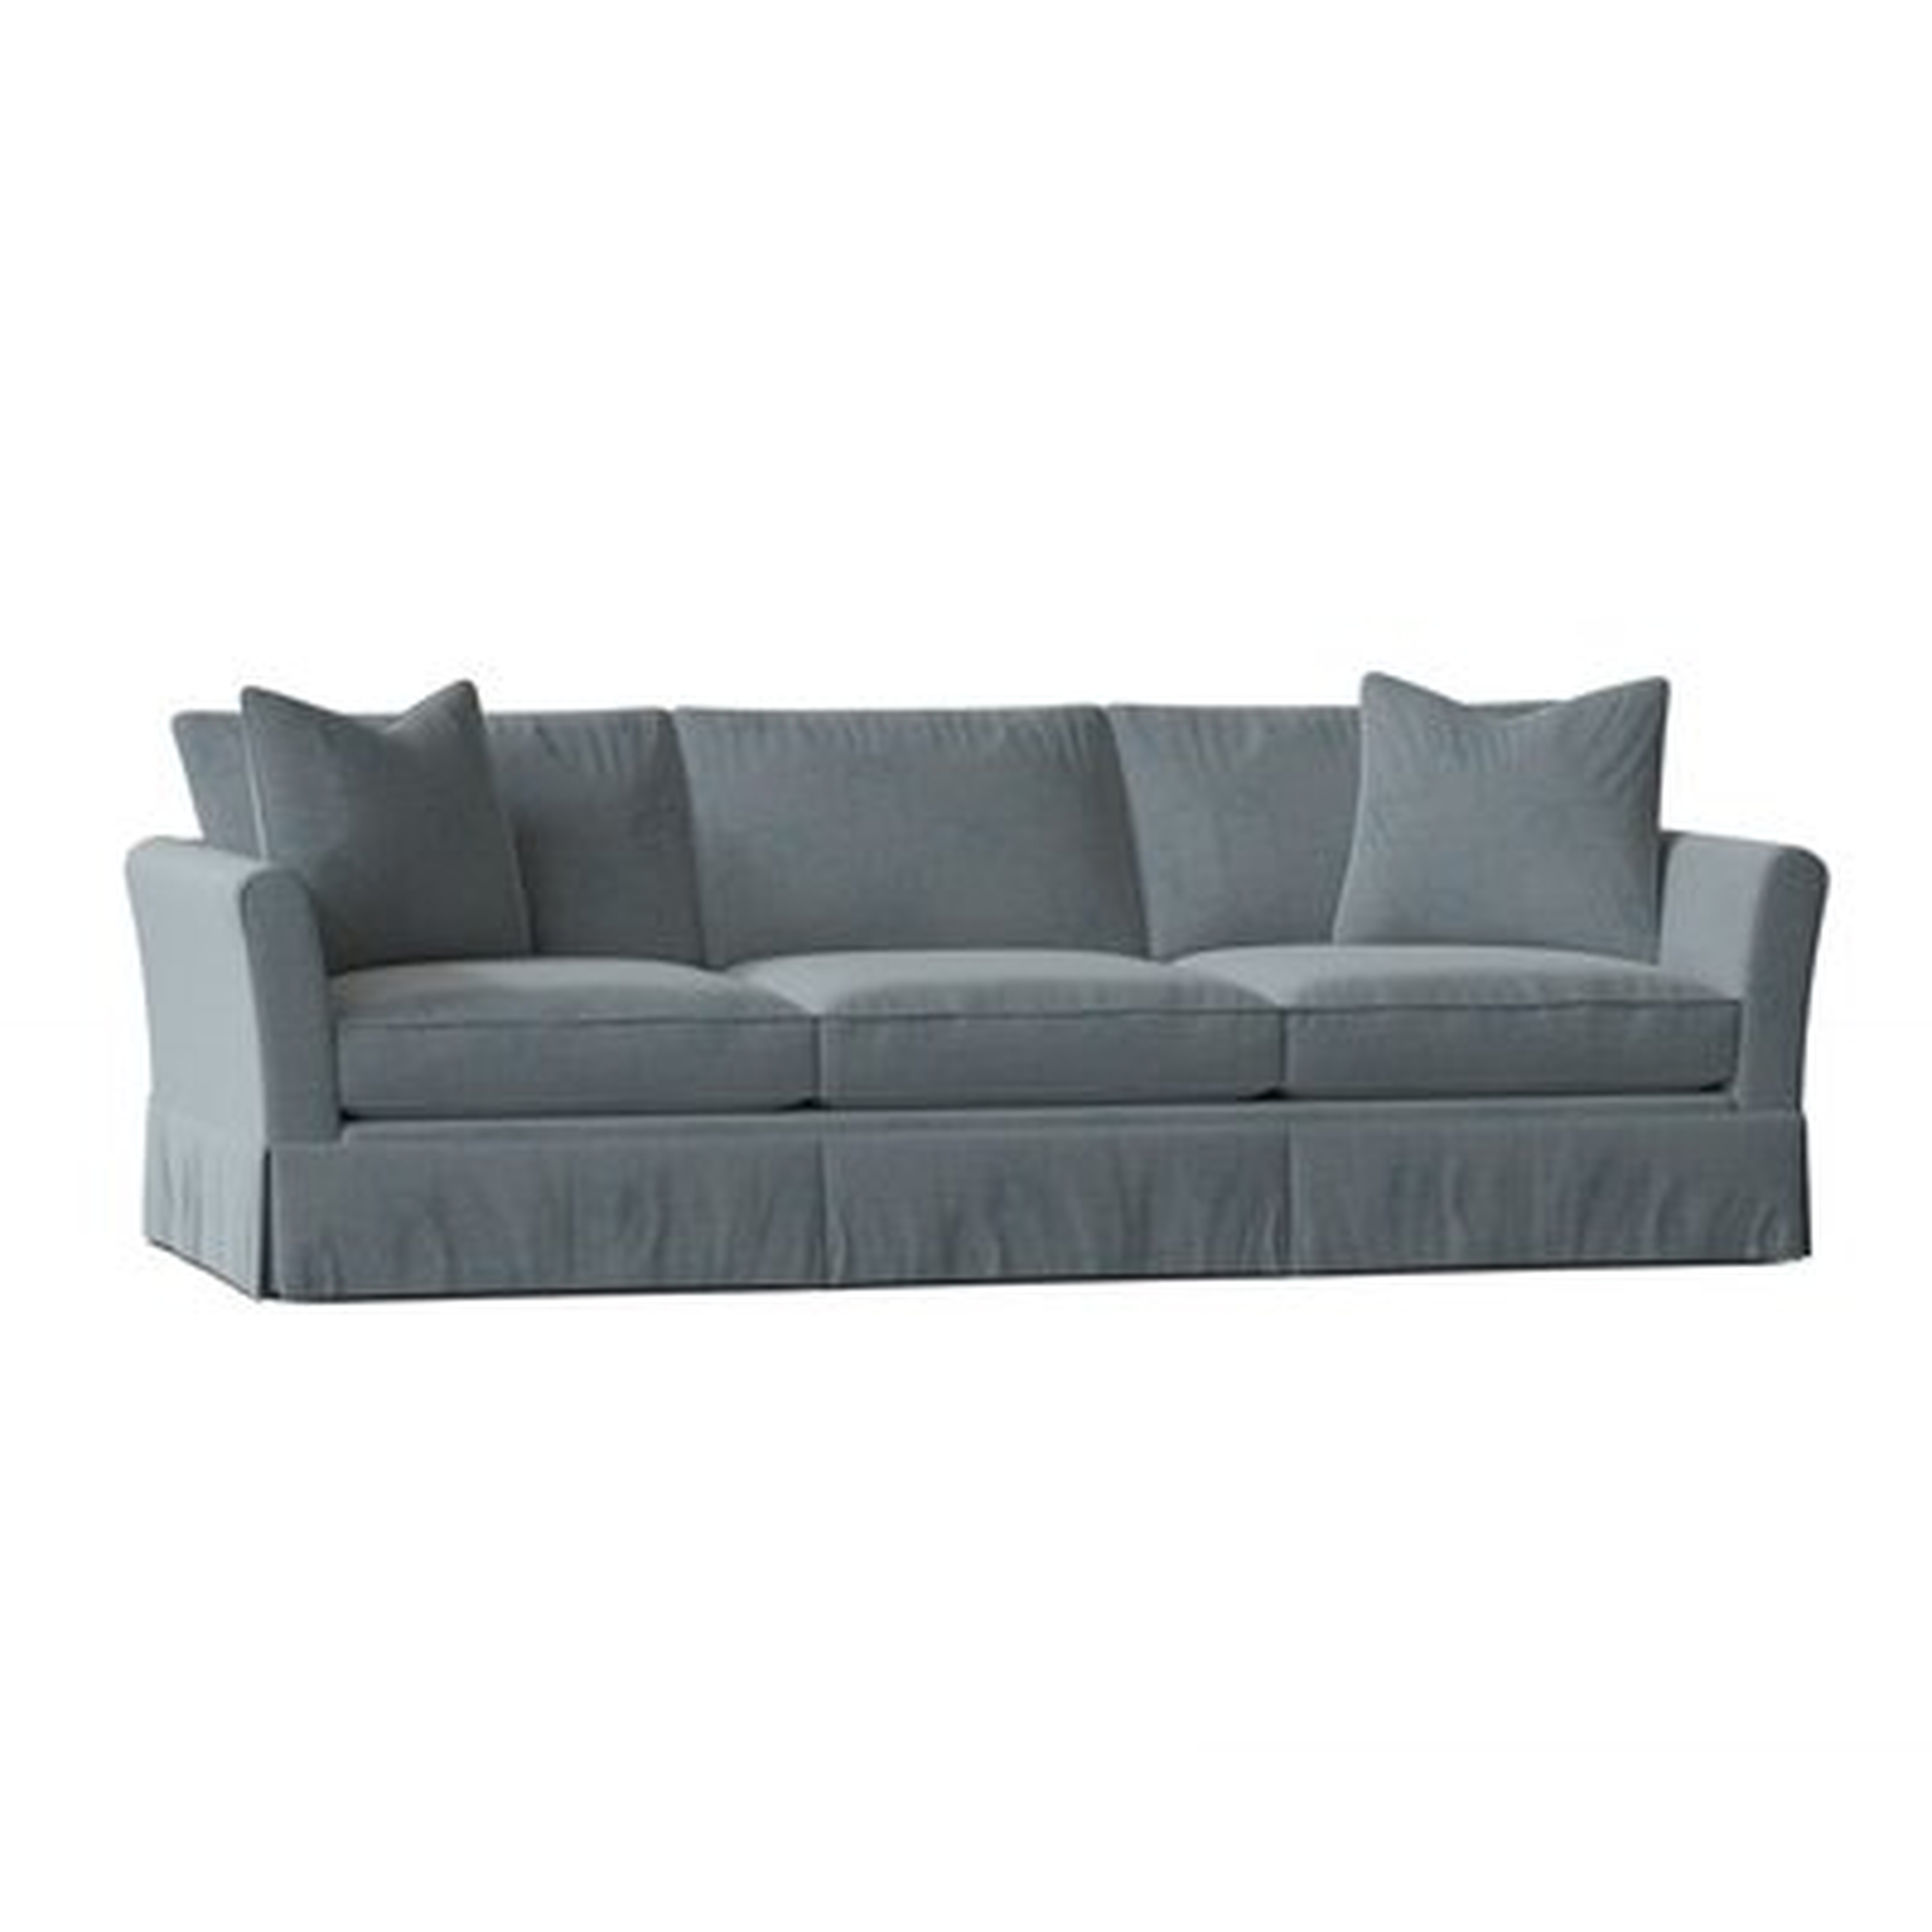 Shelby 83" Flared Arm Sofa with Reversible Cushions - Wayfair